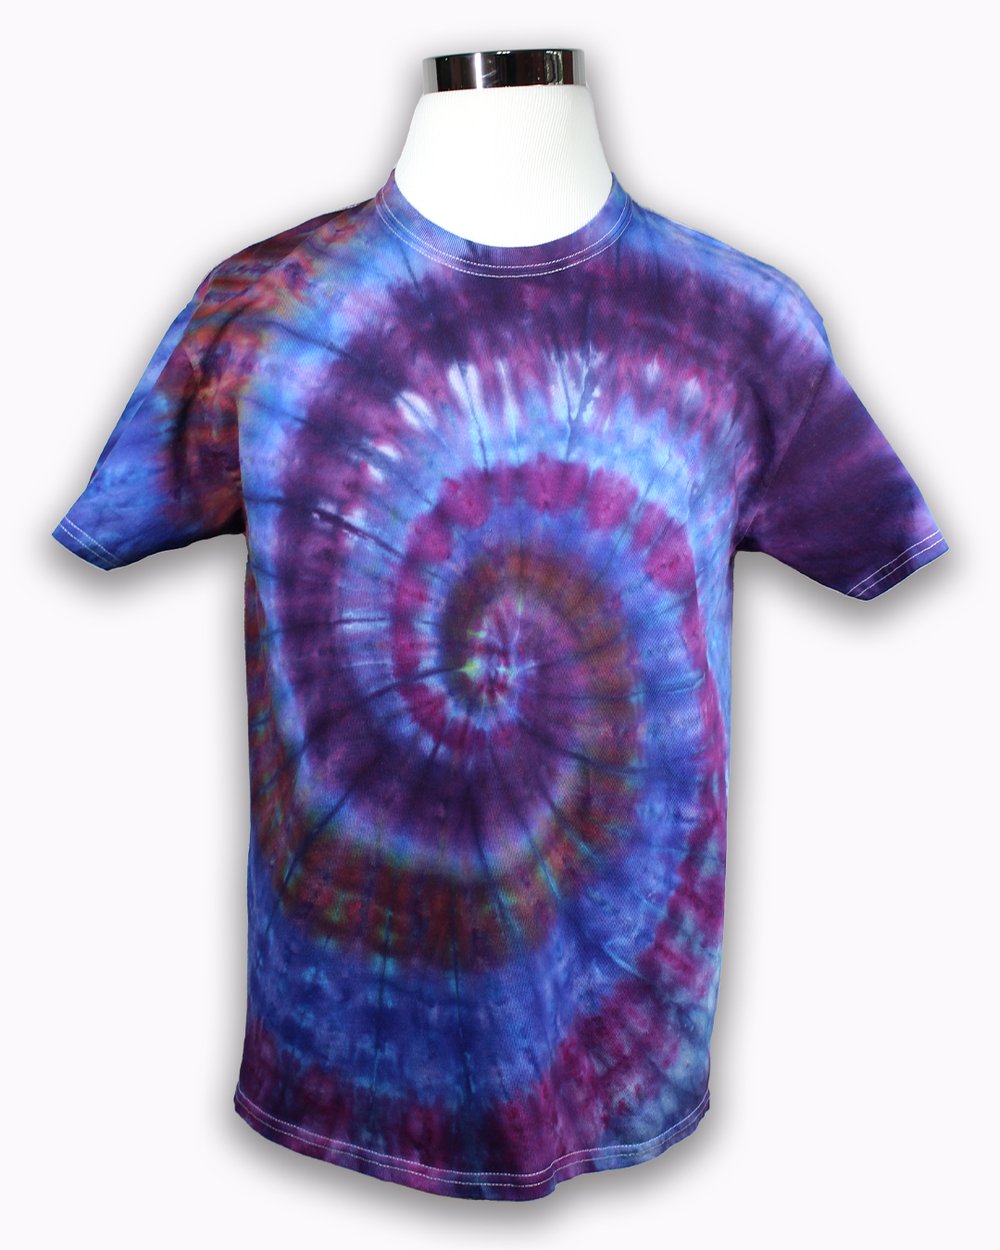 Ladies Large Purple and Blue Tie Dyed Spiral T-shirt – Pieceful